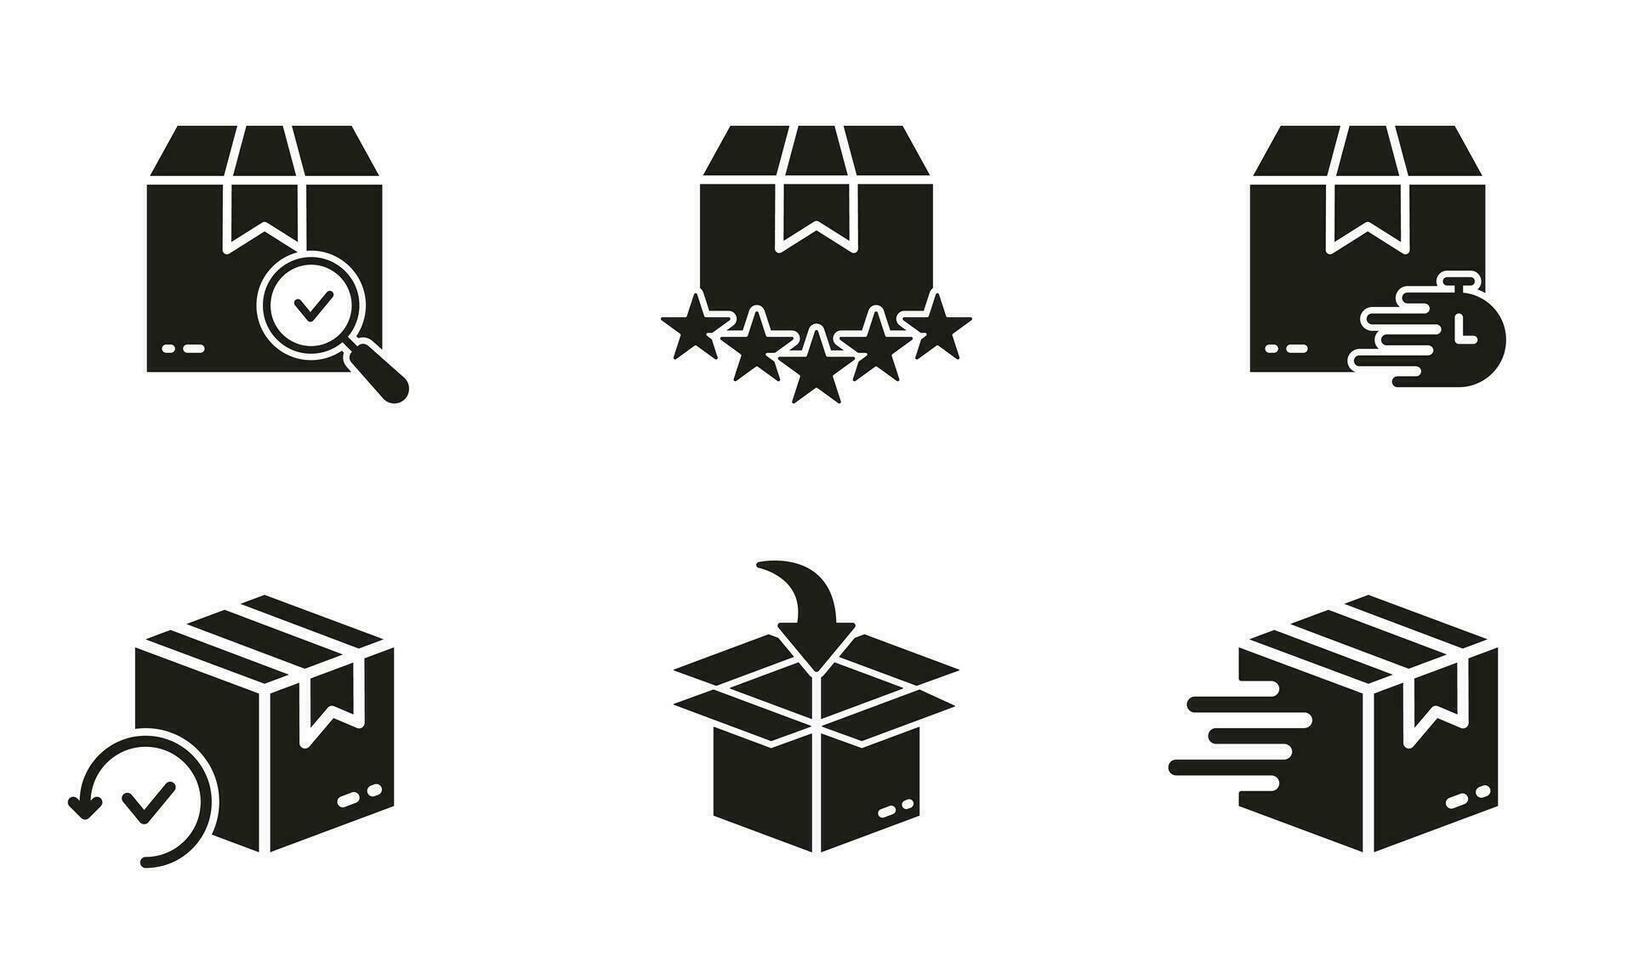 Box, Cardboard Package Silhouette Icon Set. Shipment and Distribution. Parcel Shipping Glyph Pictogram. Carton Container Sign. Fast Delivery Service Symbol Collection. Isolated Vector Illustration.